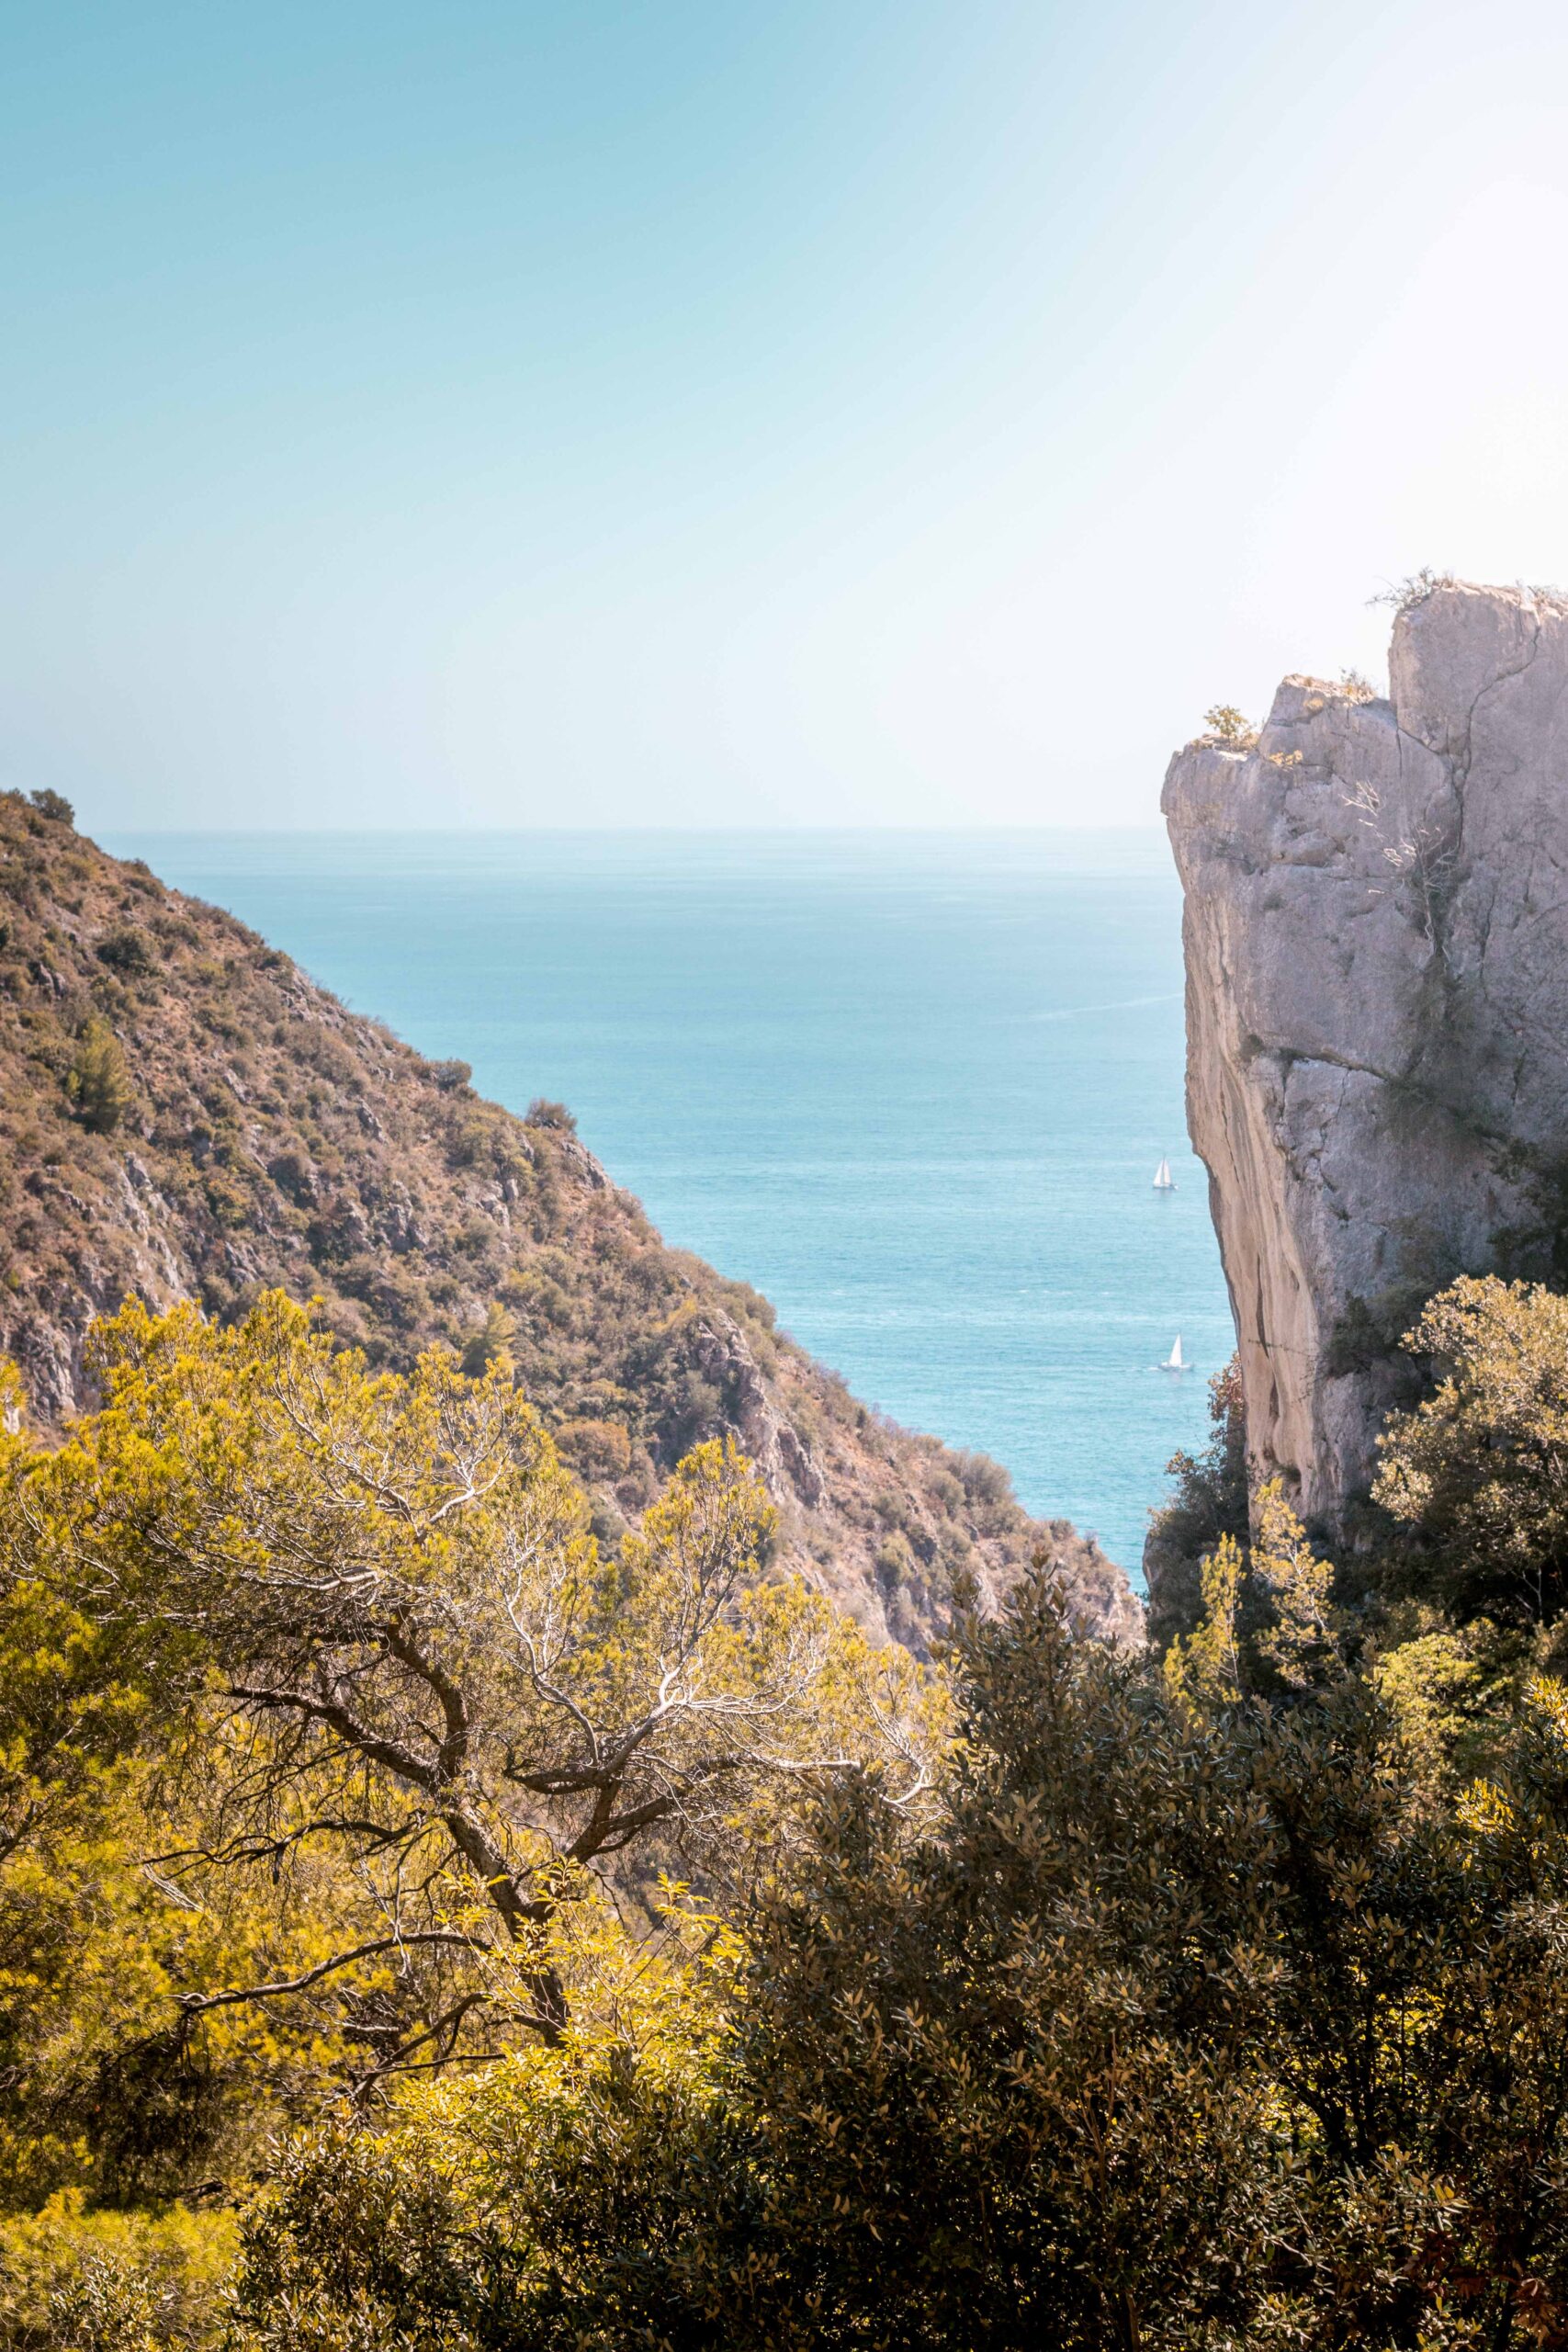 Landscape view of the cliffs, forest and Mediterranean sea as seen from the Sentier de Nietzche hike in Eze, France